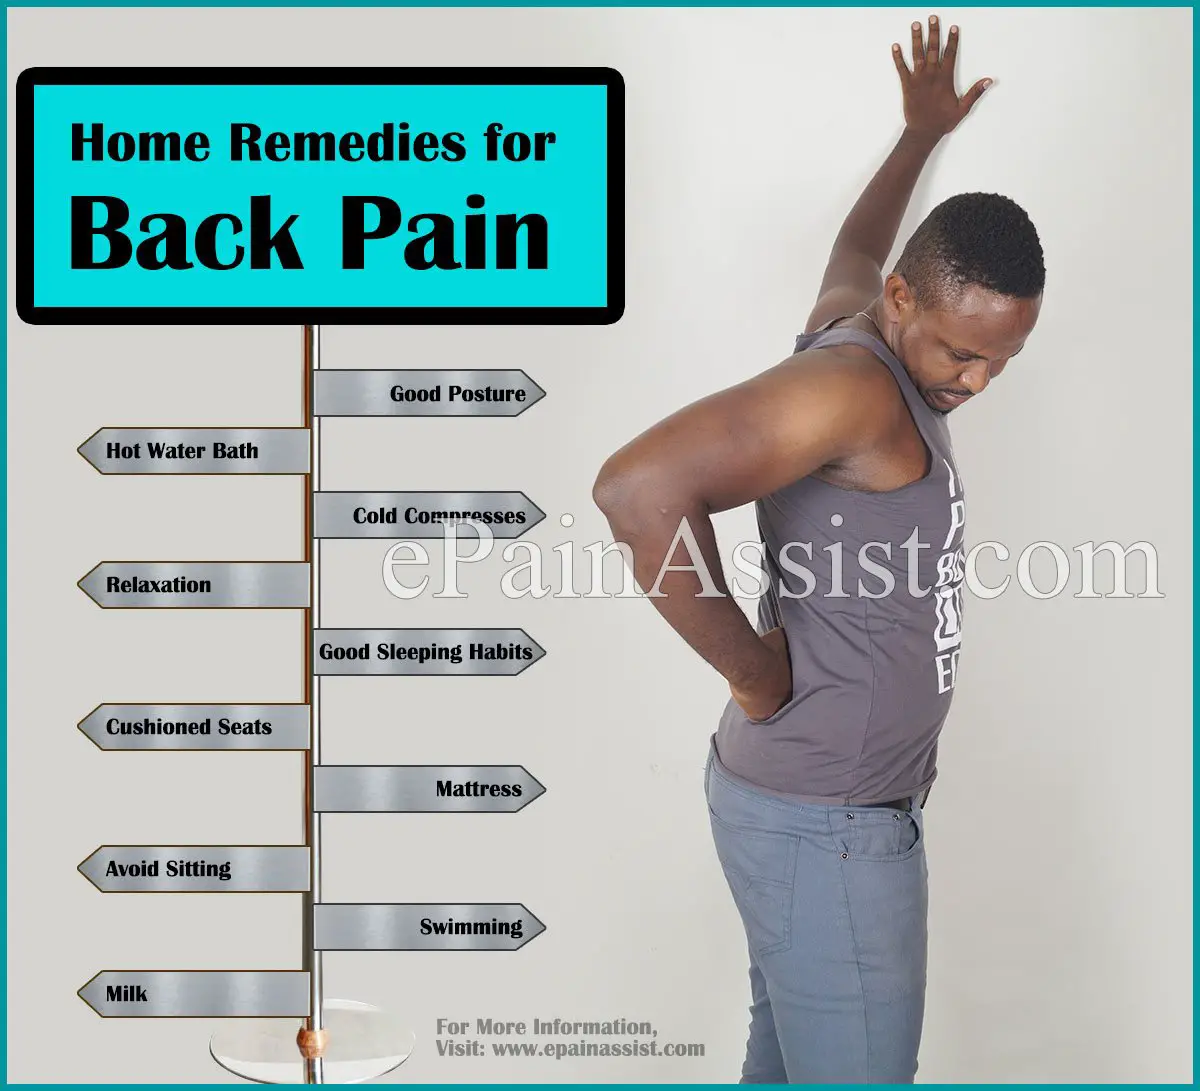 Home Remedies for Back Pain: Ease Back Pain Naturally